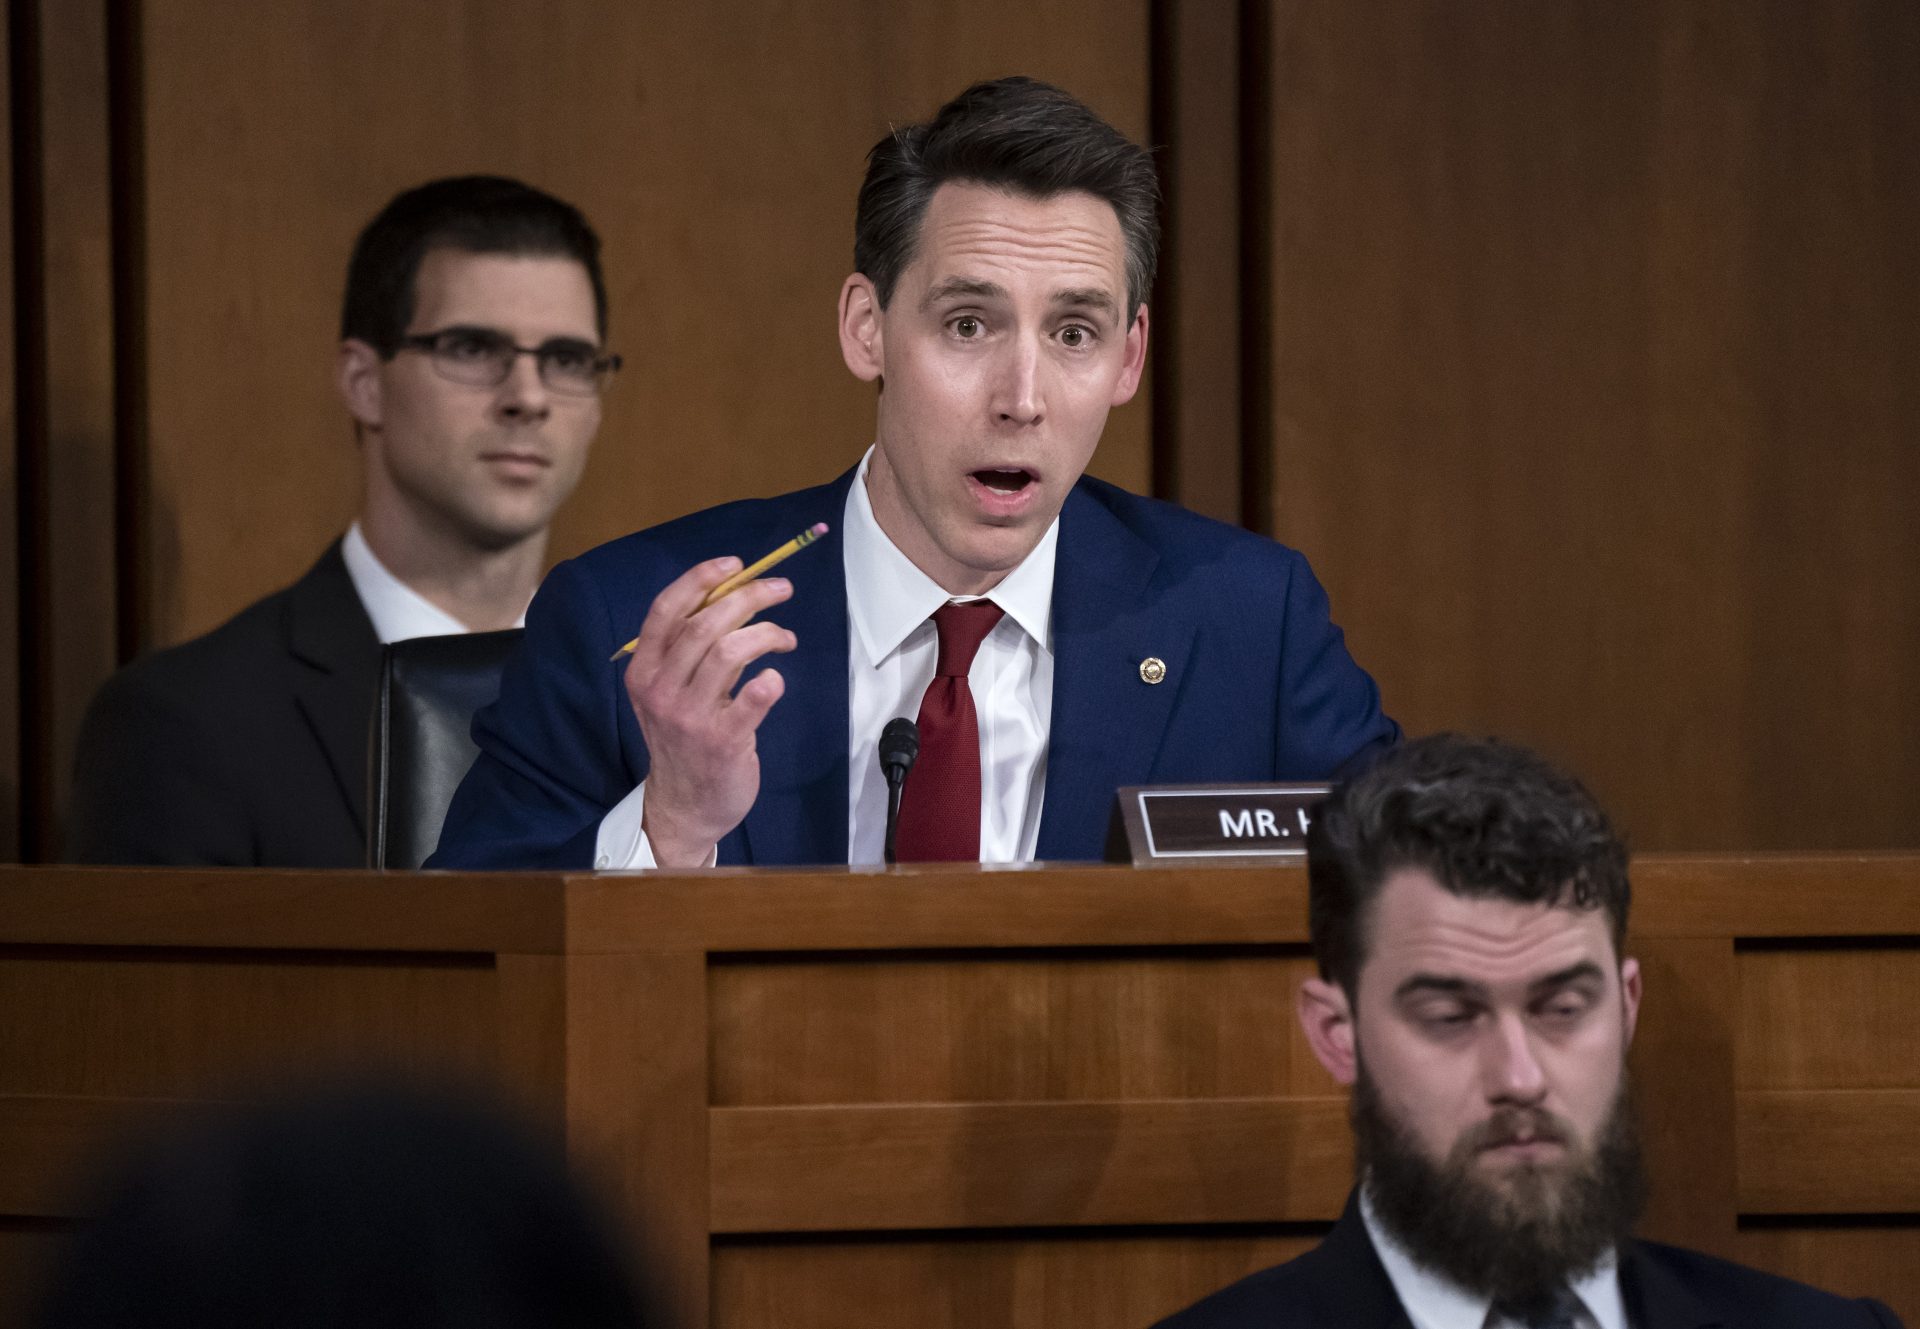 Sen. Josh Hawley, R-Mo., questions Supreme Court nominee Ketanji Brown Jackson during her Senate Judiciary Committee confirmation hearing, on Capitol Hill in Washington, Tuesday, March 22, 2022.